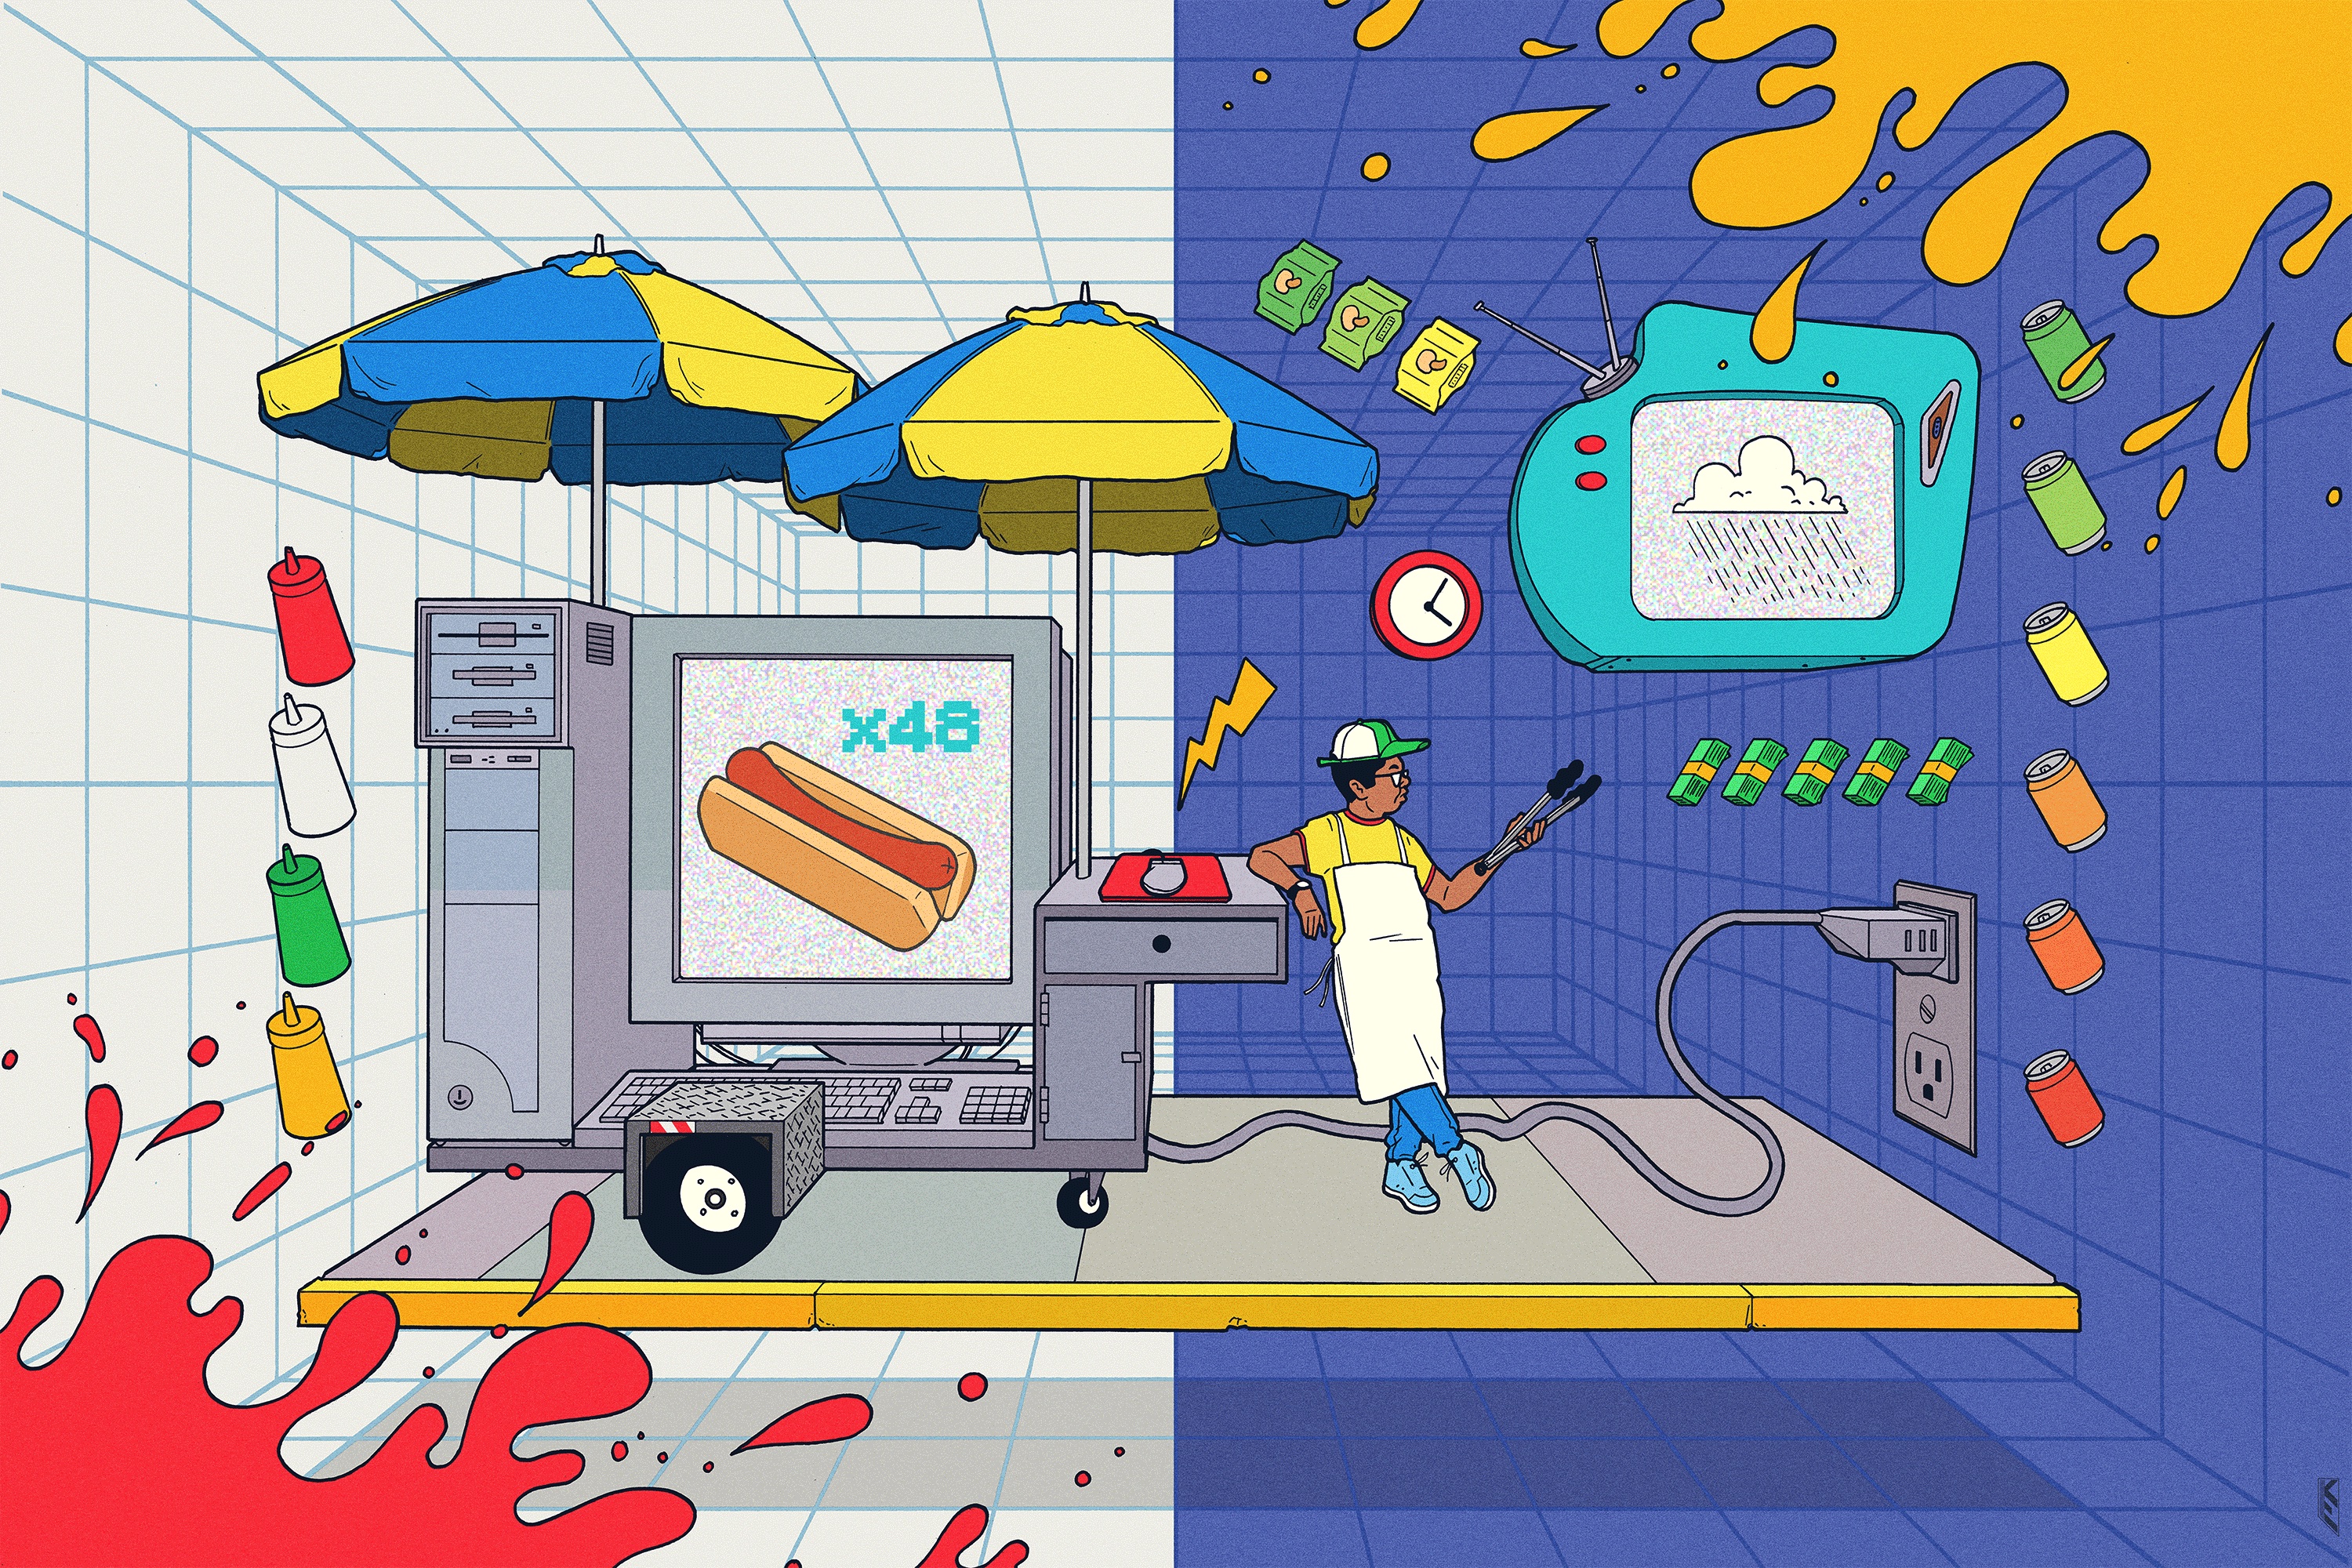 An illustration shows a hot dog stand worker working a stand in real life and on his tablet